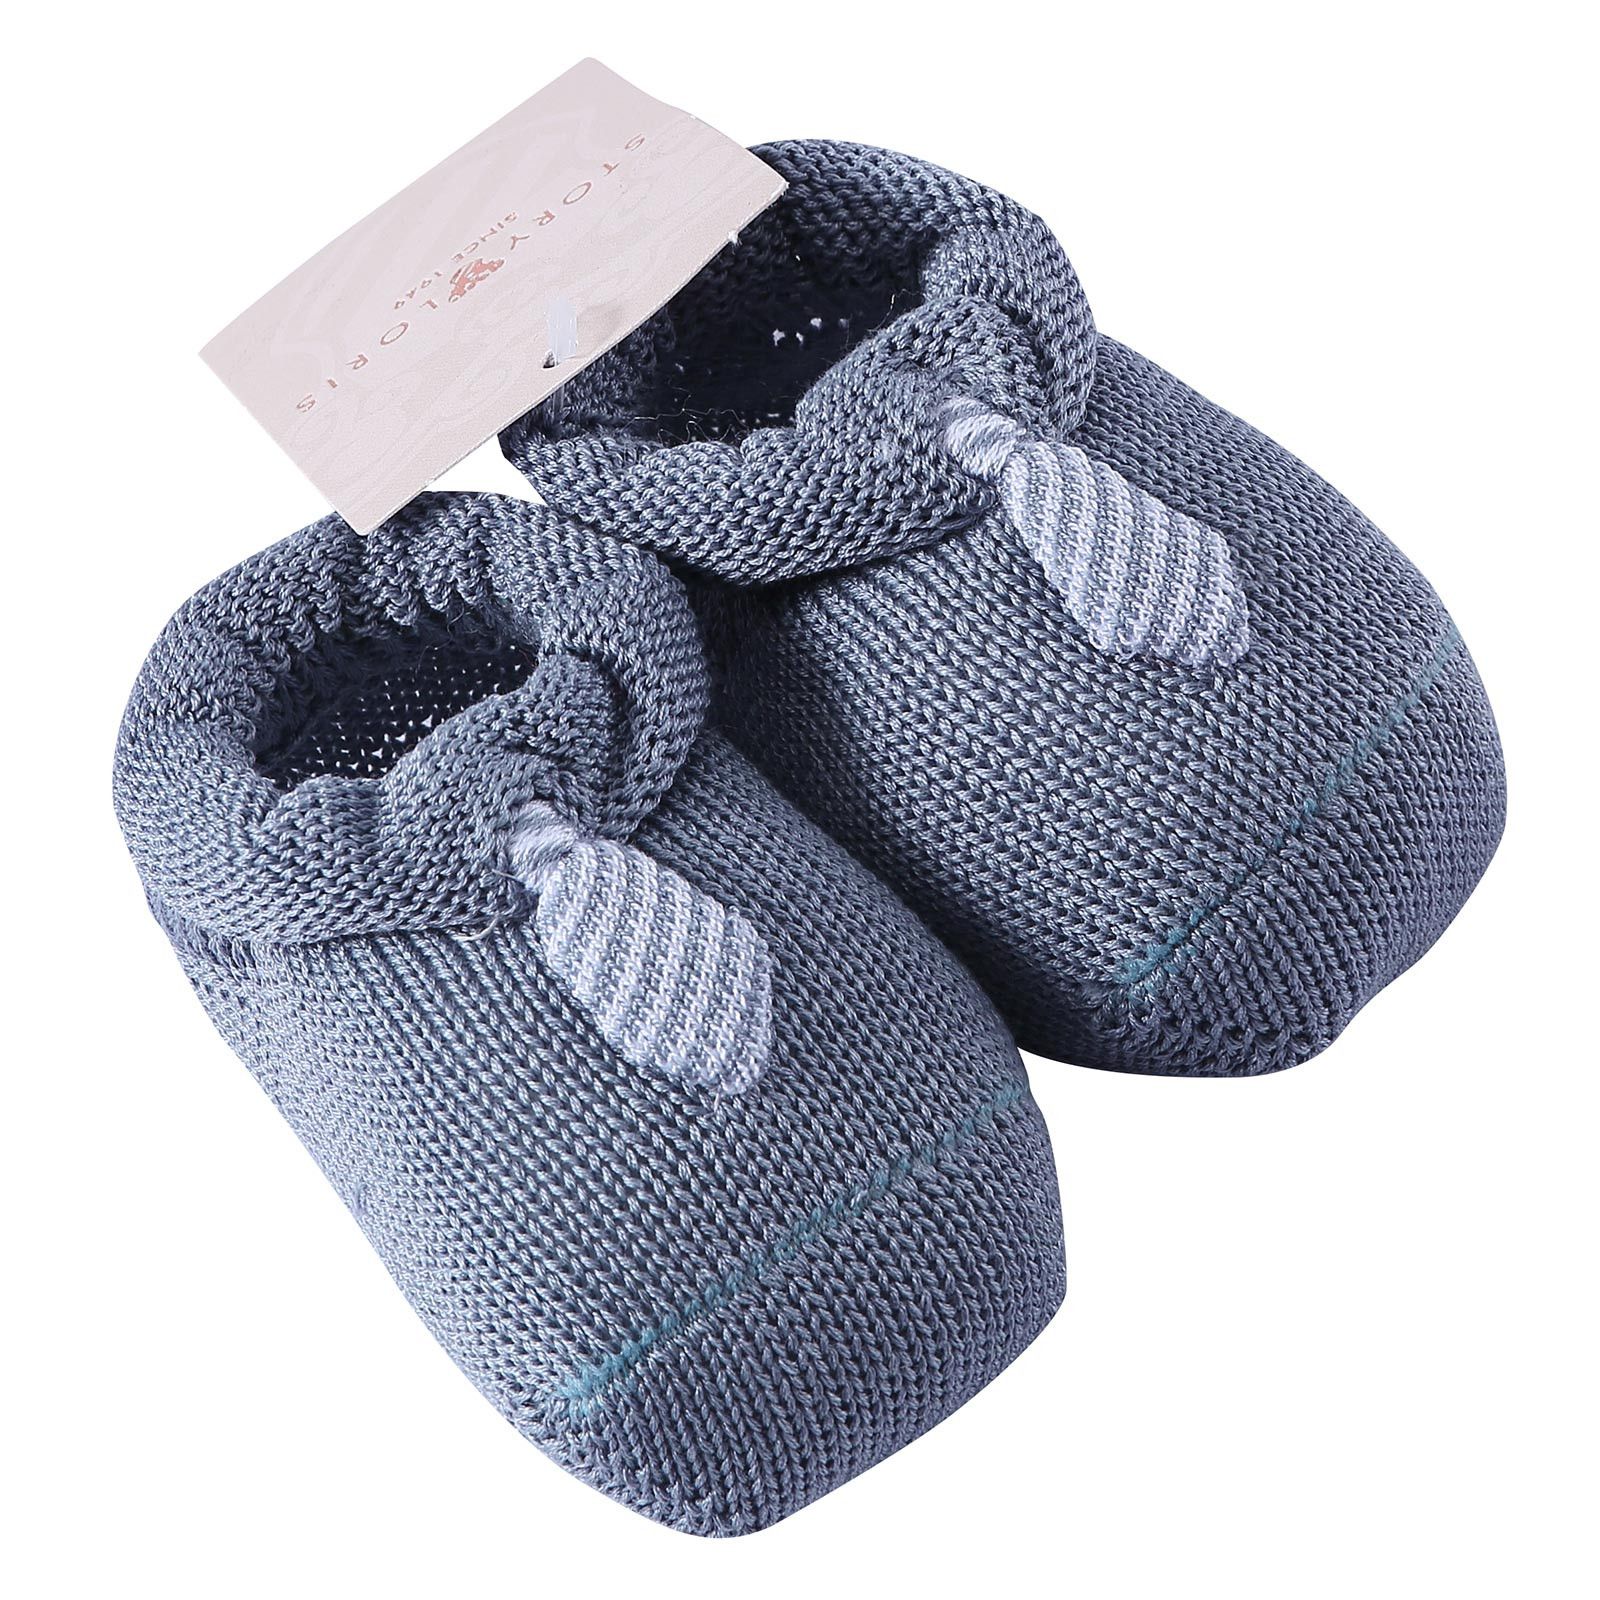 Baby Grey Knitted Cotton Shoes With Blue Tie Trims - CÉMAROSE | Children's Fashion Store - 2